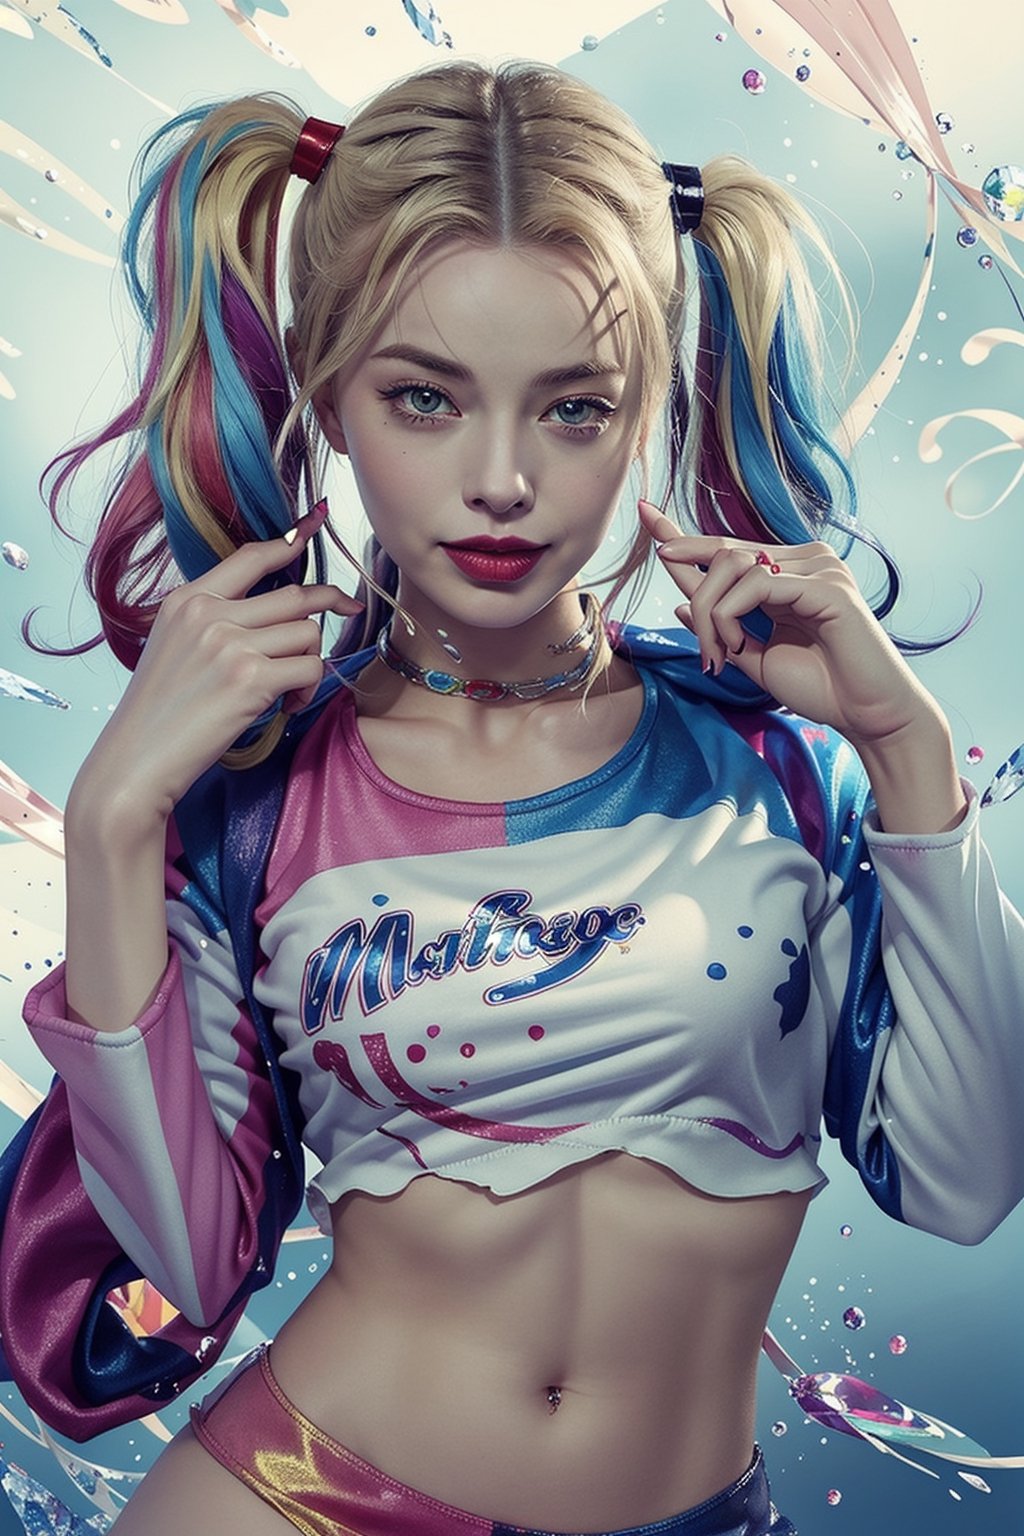 ((masterpiece, best quality)), harley quinn,margot robbie,mini skirt,sexy,curvy body,detailed face,perfect eyes,detailed hands,hands up,light background,mix of fantasy and realistic elements,vibrant manga,uhd picture , crystal translucency, vibrant artwork